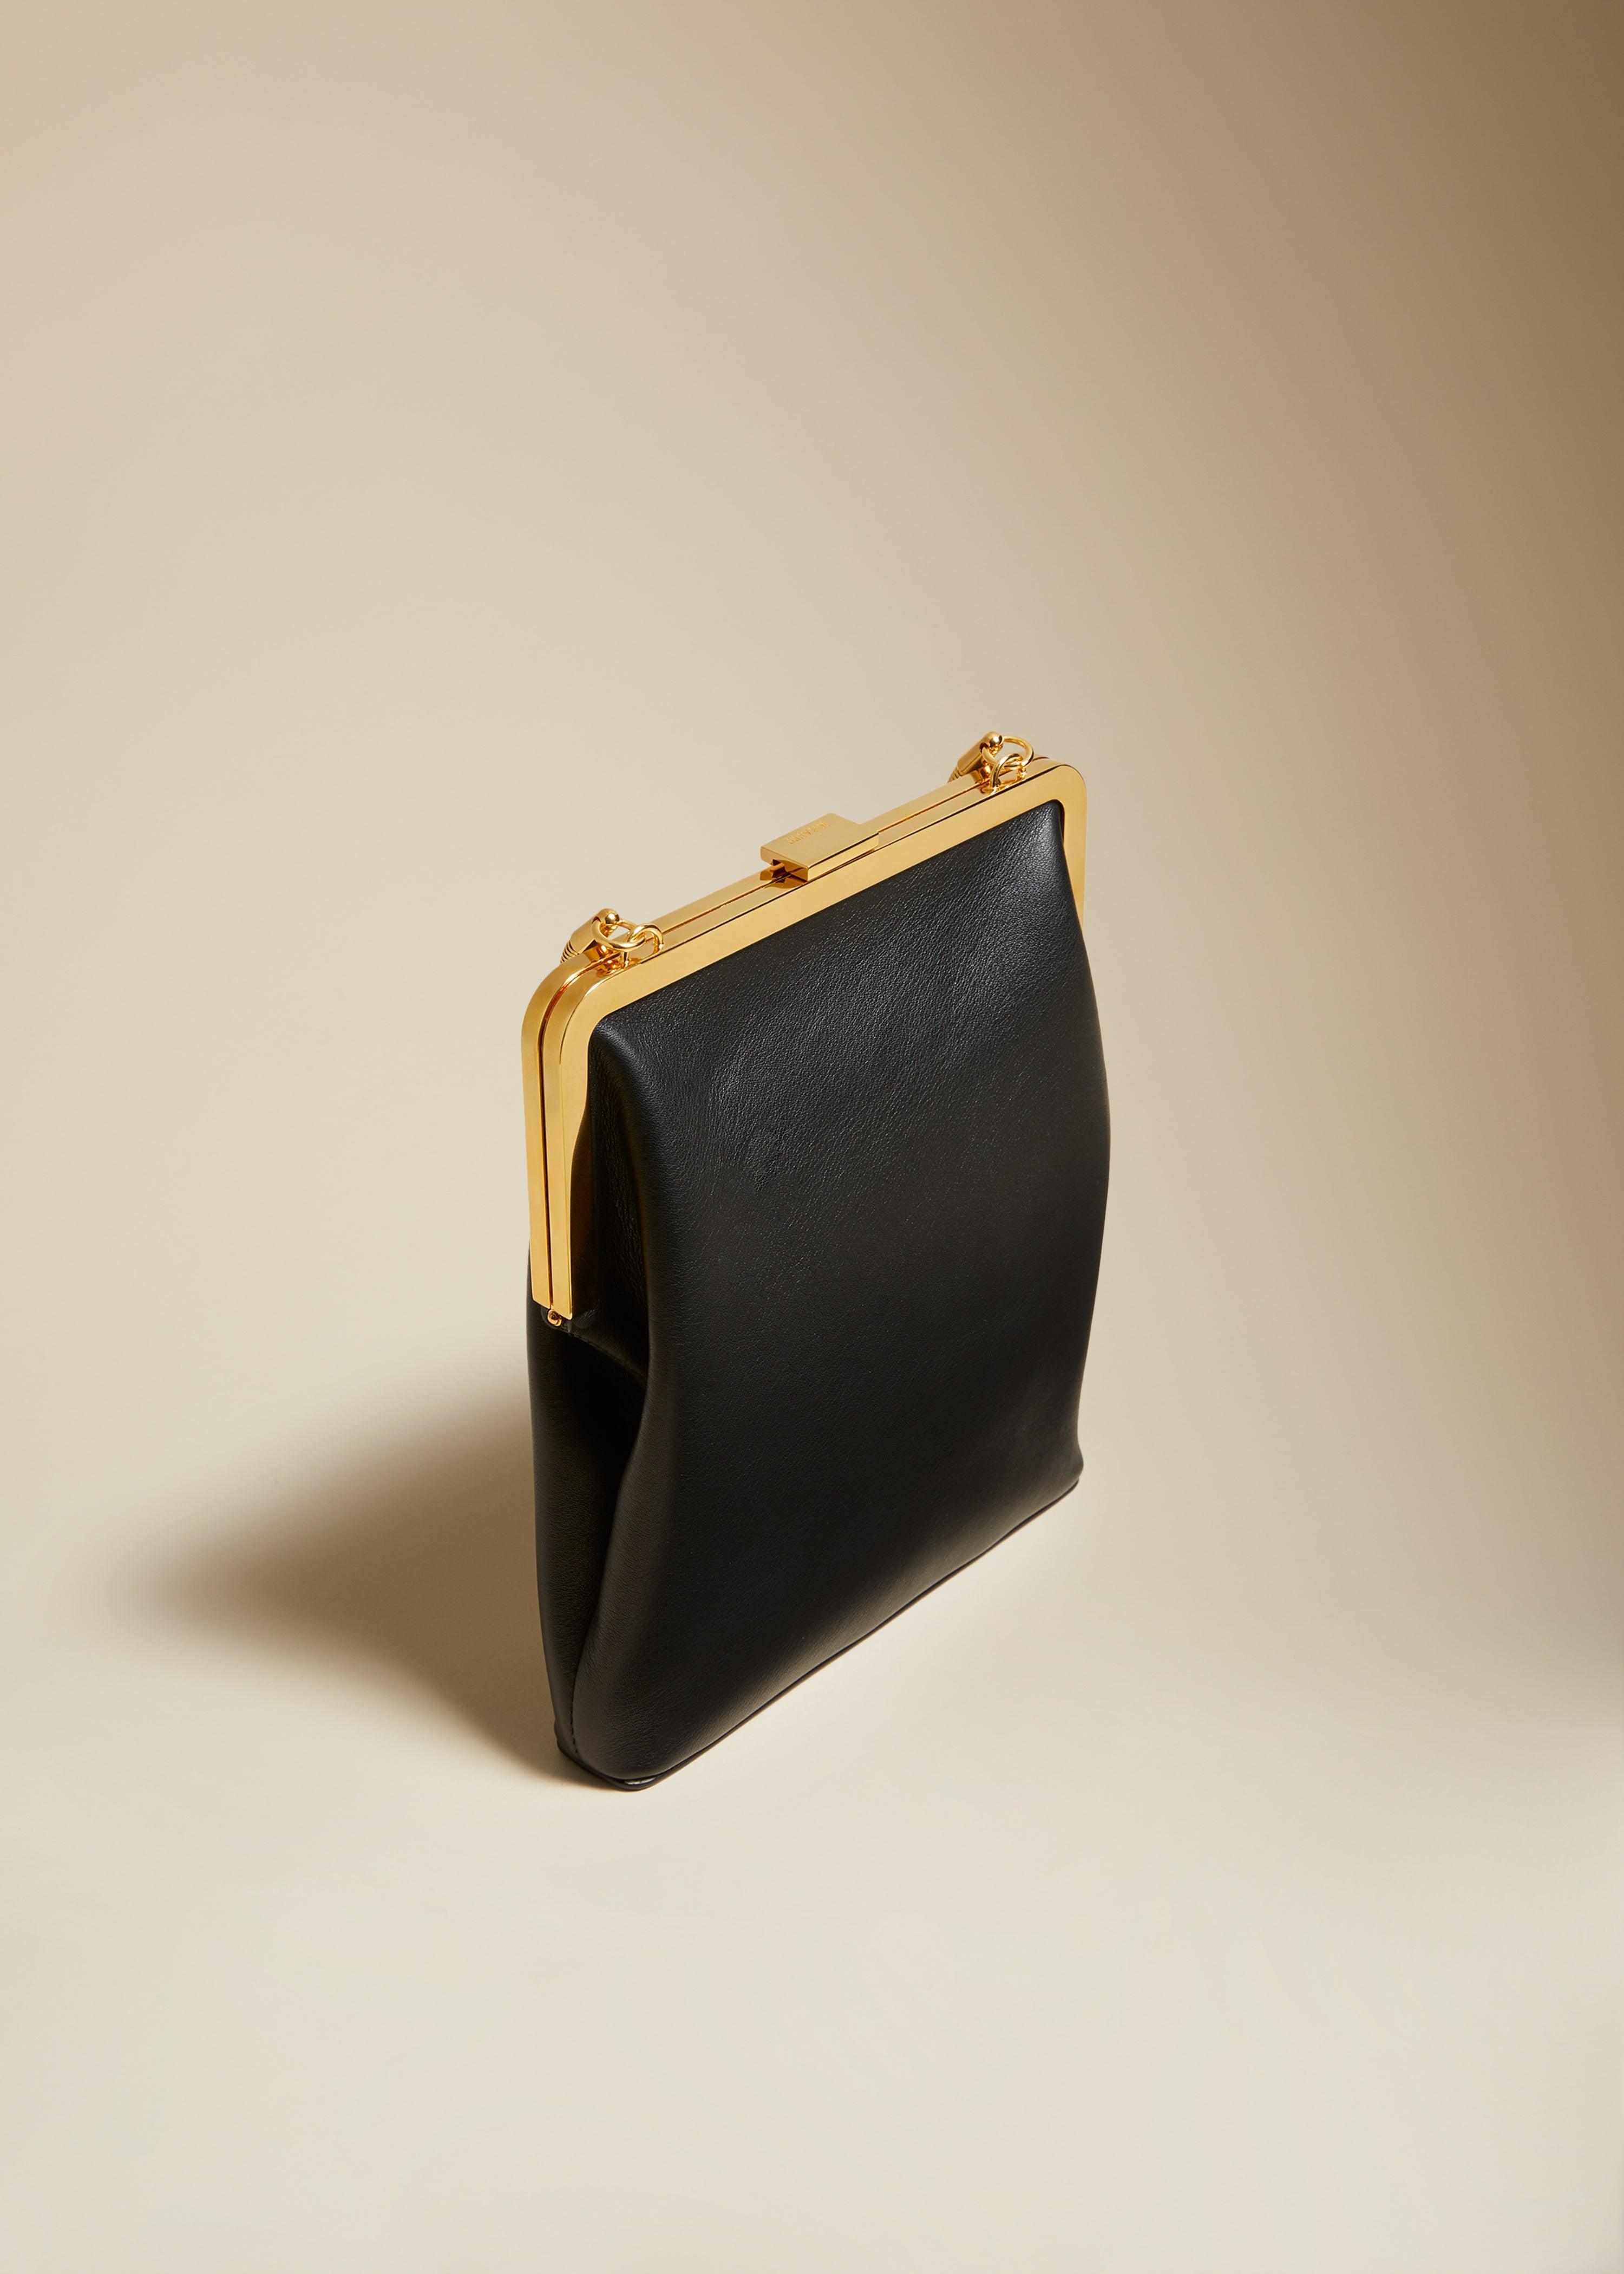 The Lilith Evening Bag in Black Leather - The Iconic Issue